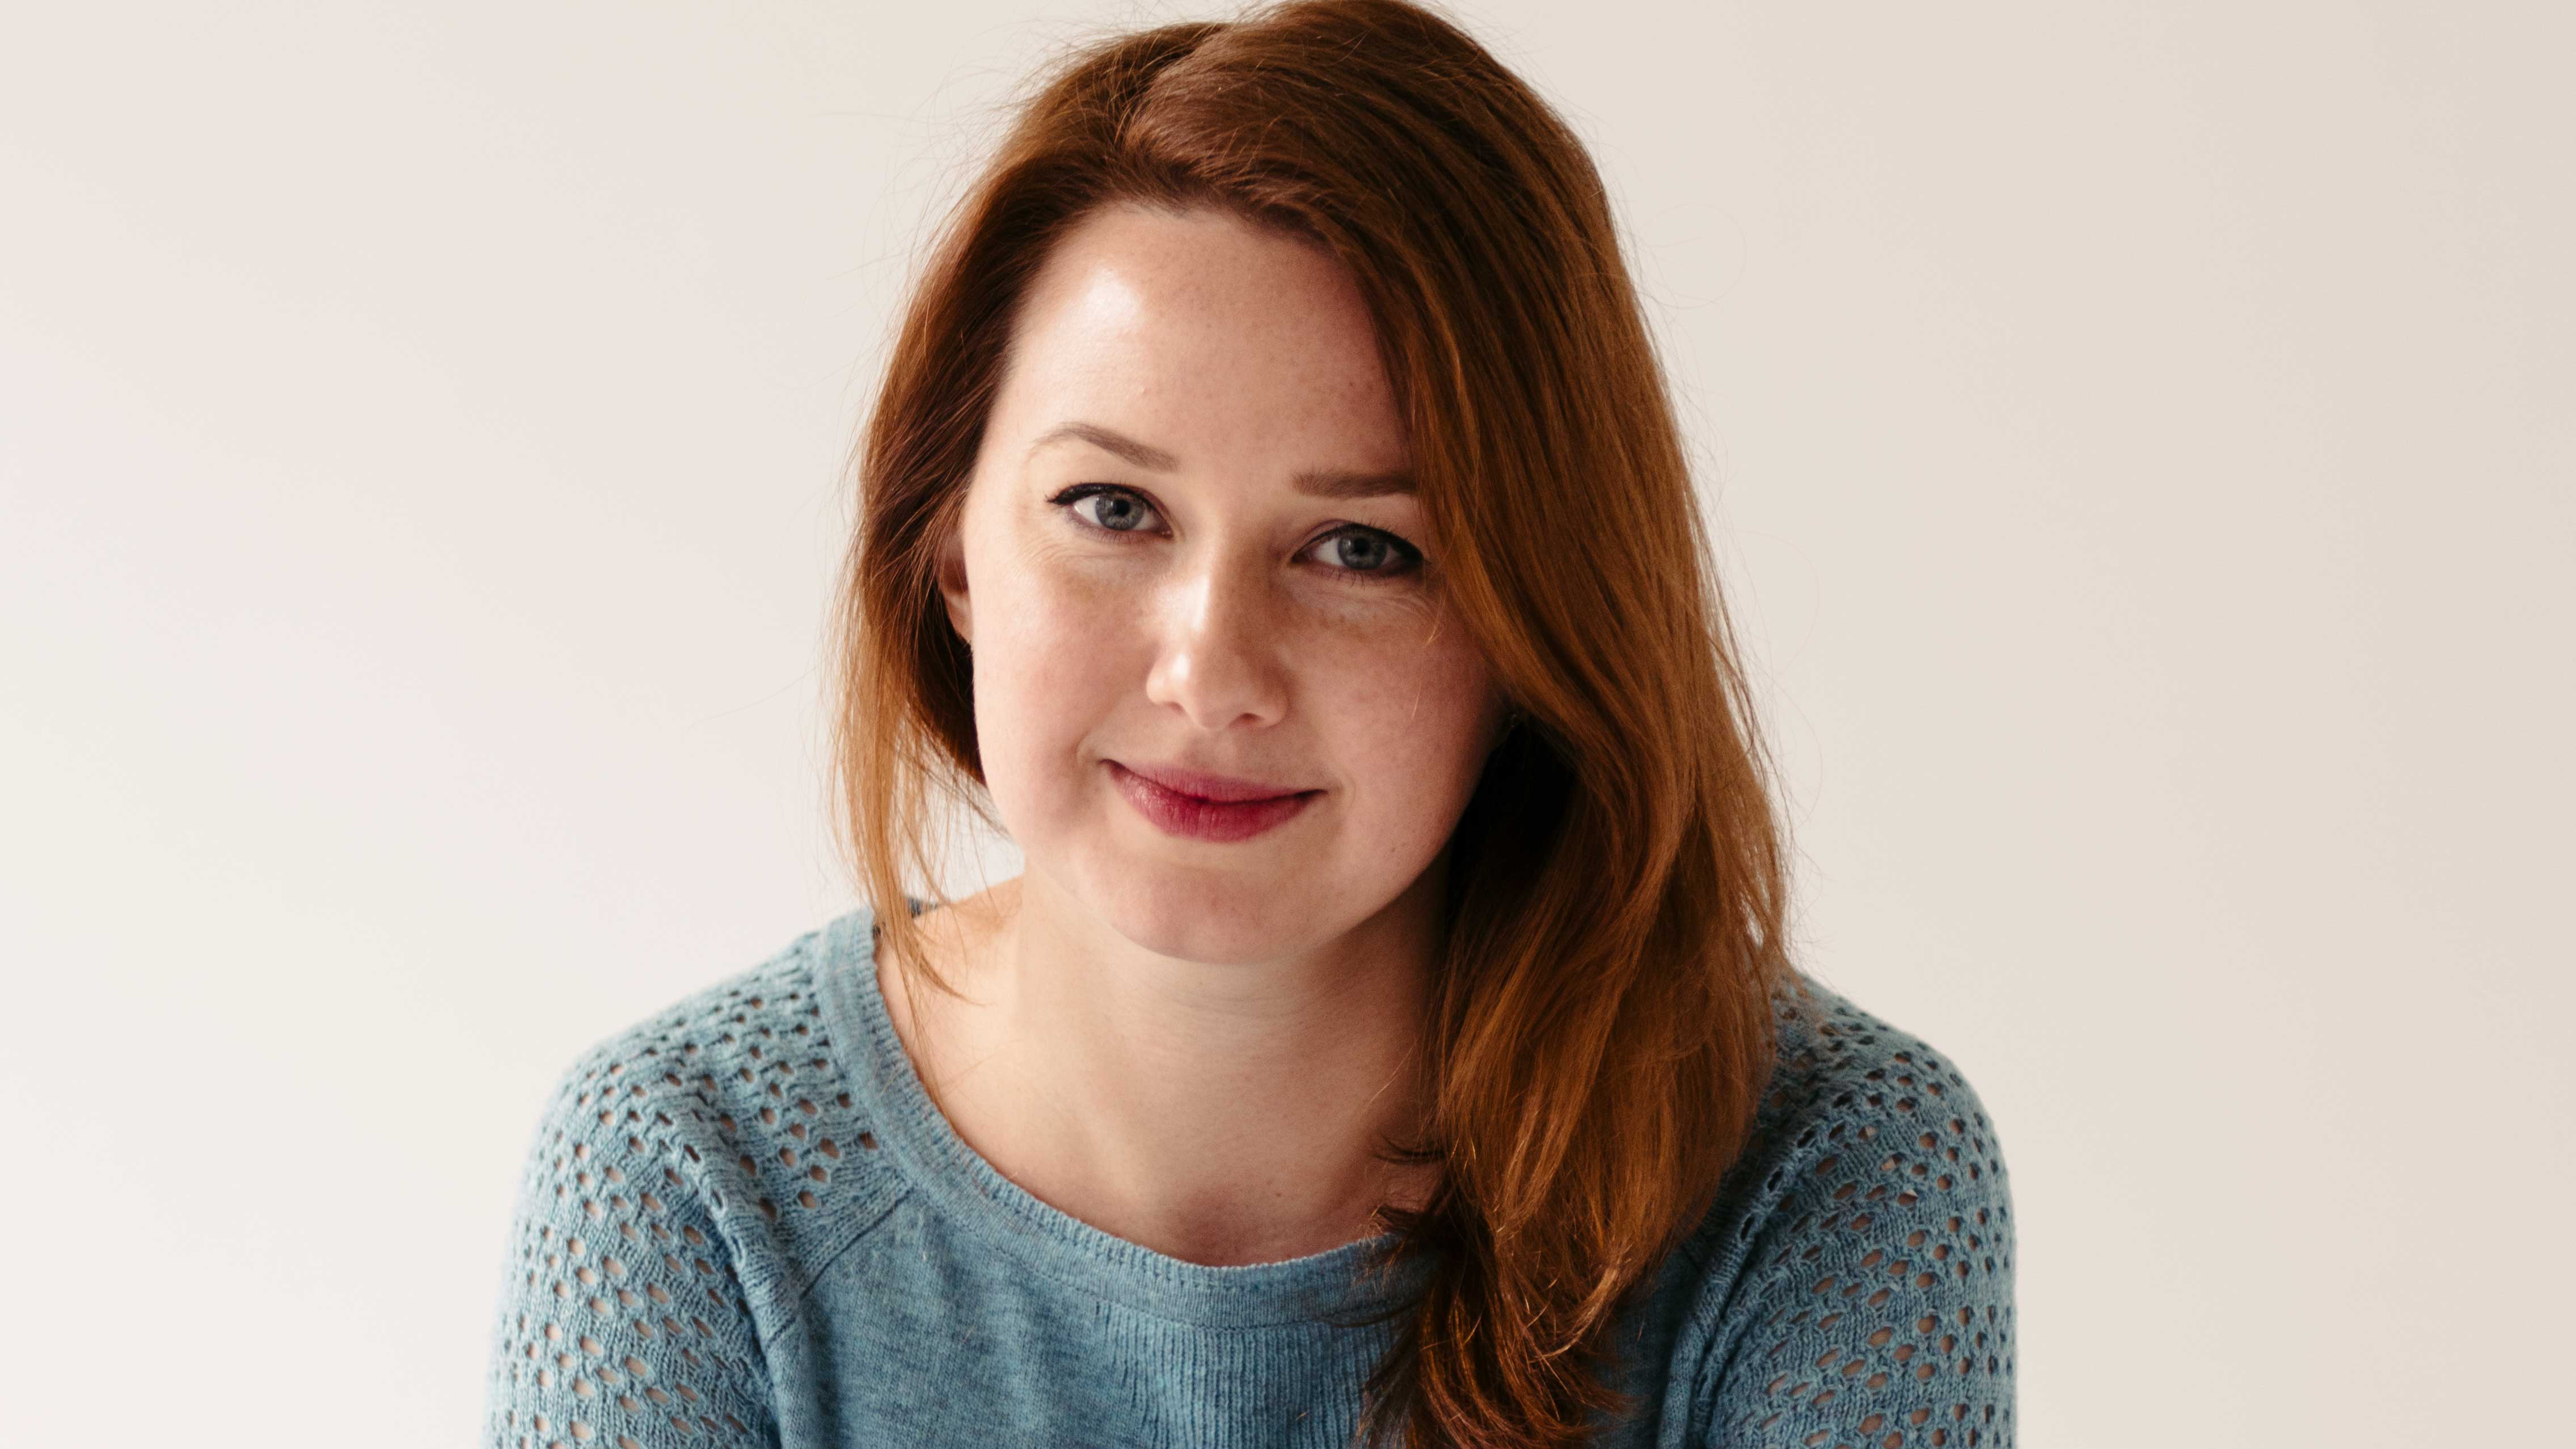 A photograph of Hannah Kent smiling at the camera wearing a blue jumper in front of a plain cream backdrop